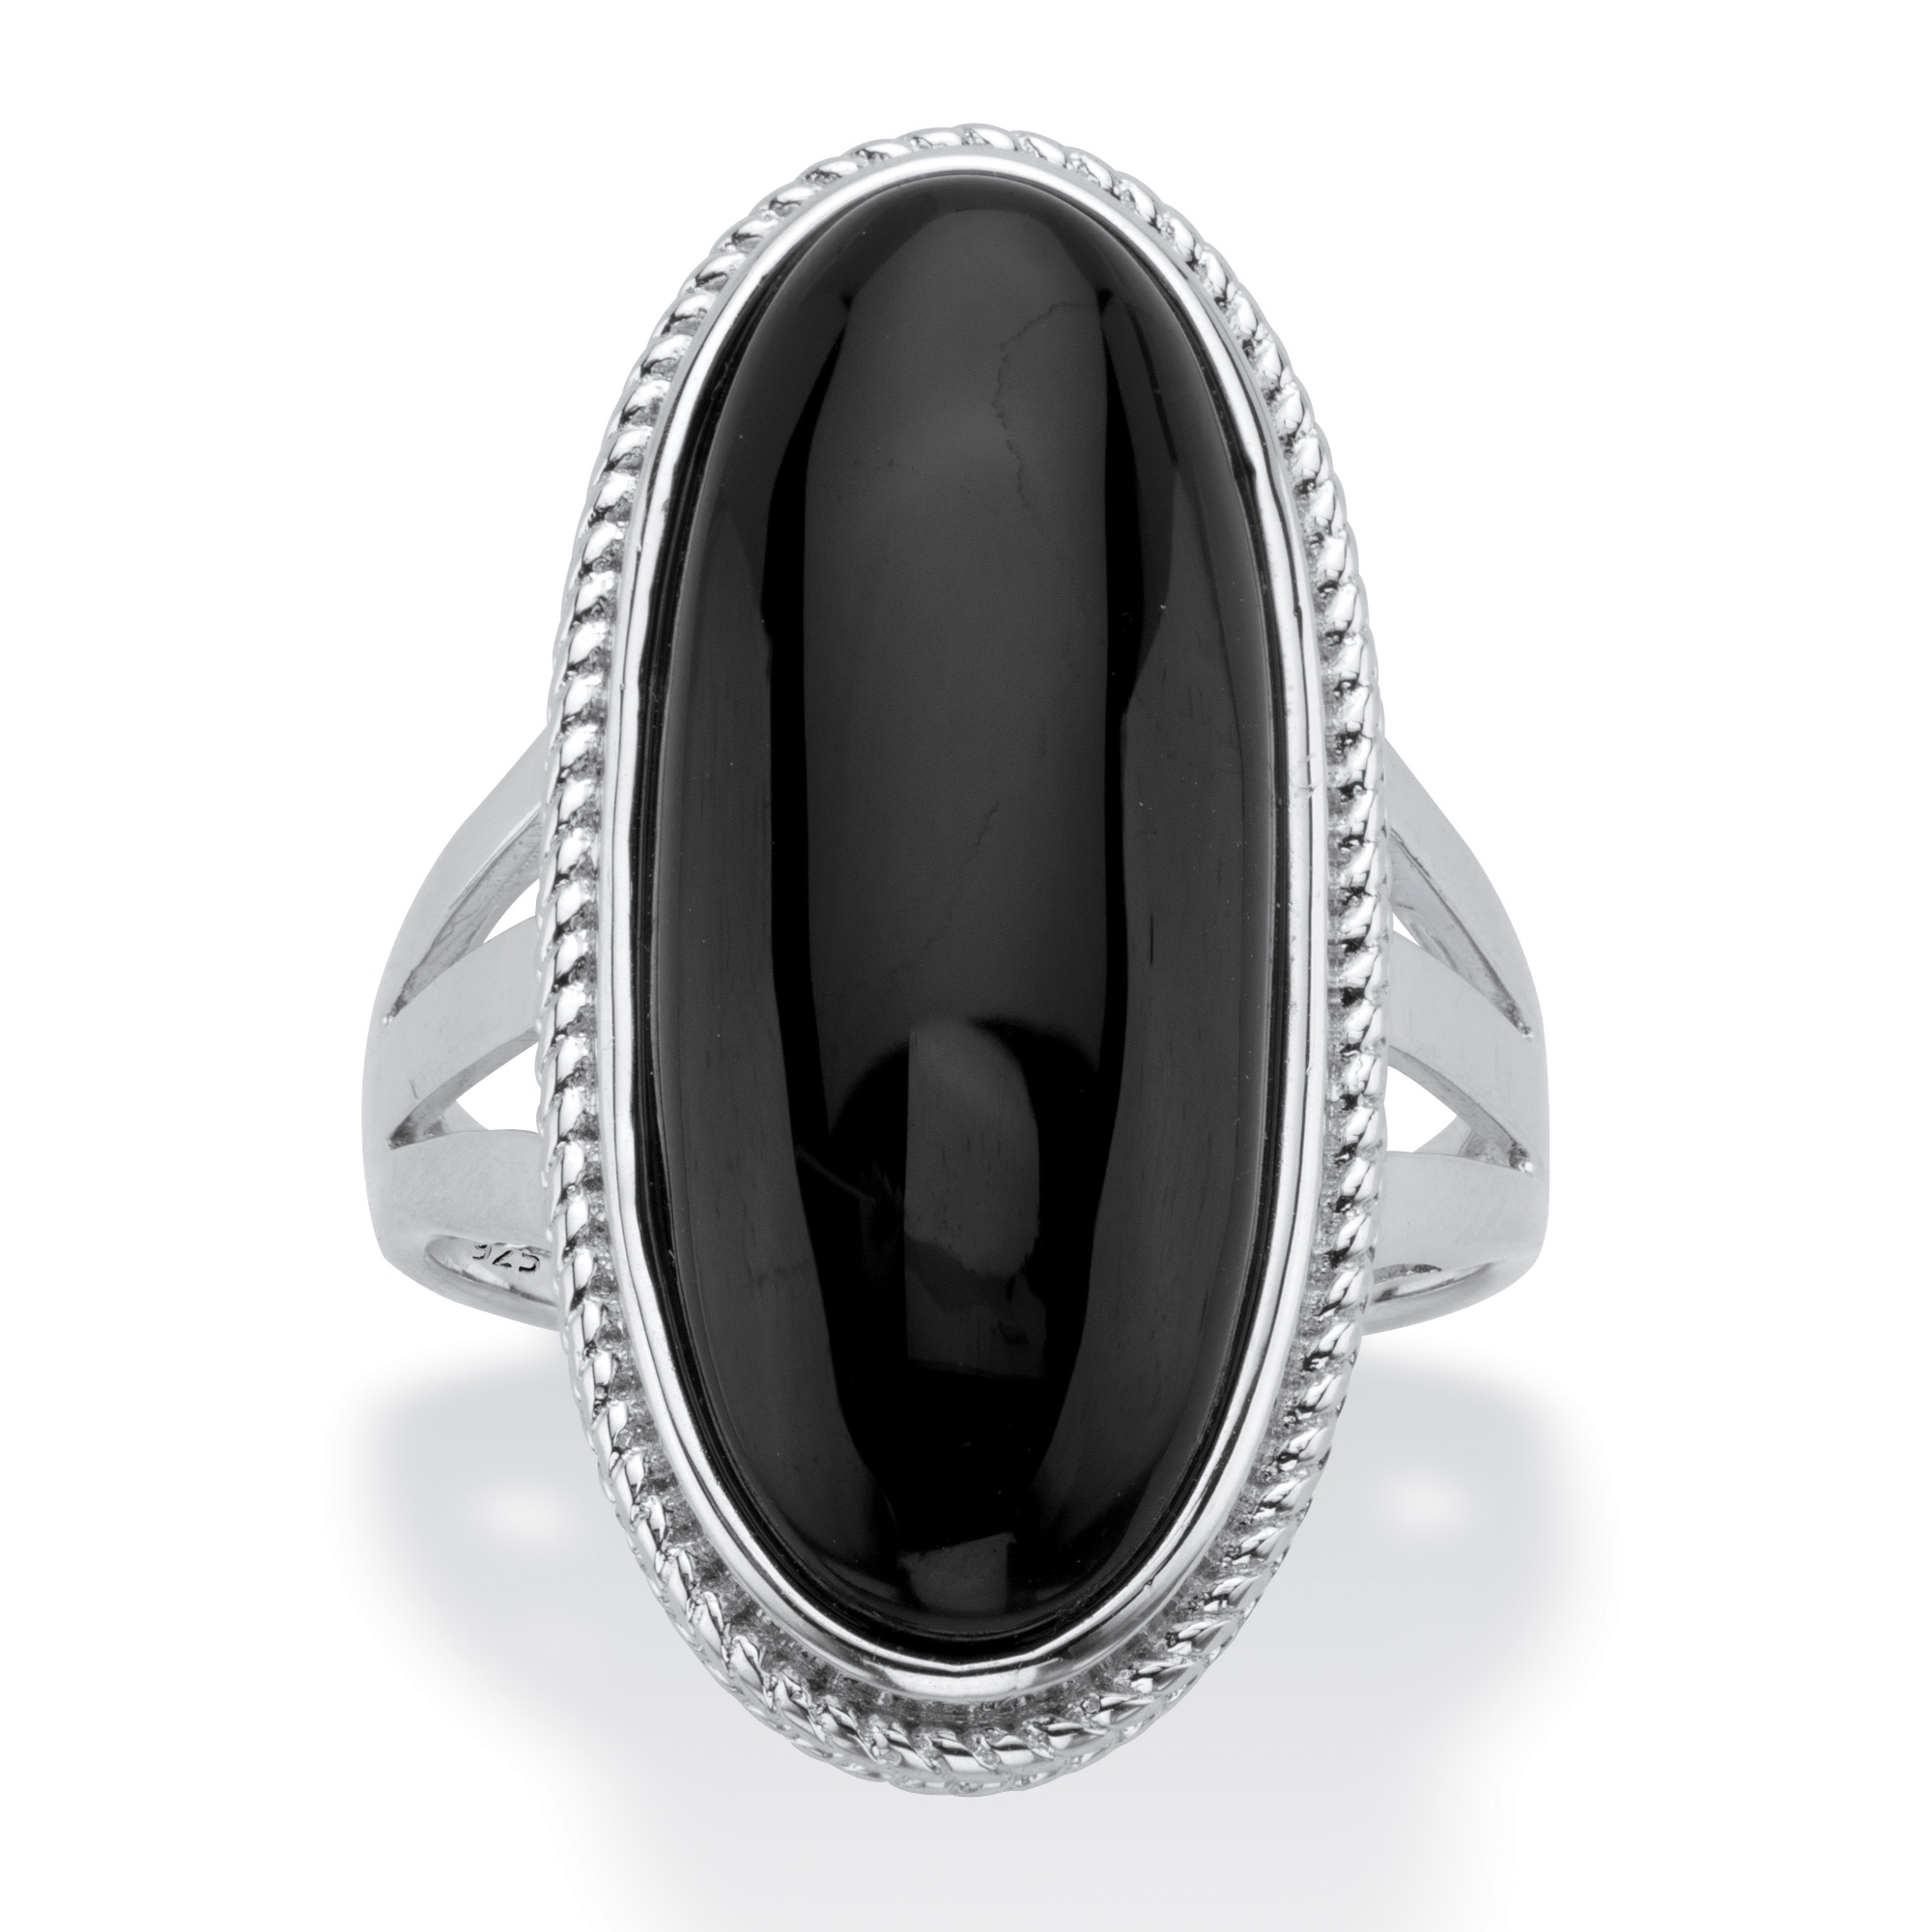 Genuine Black Onyx Oval Cabochon Ring in Sterling Silver at PalmBeach ...